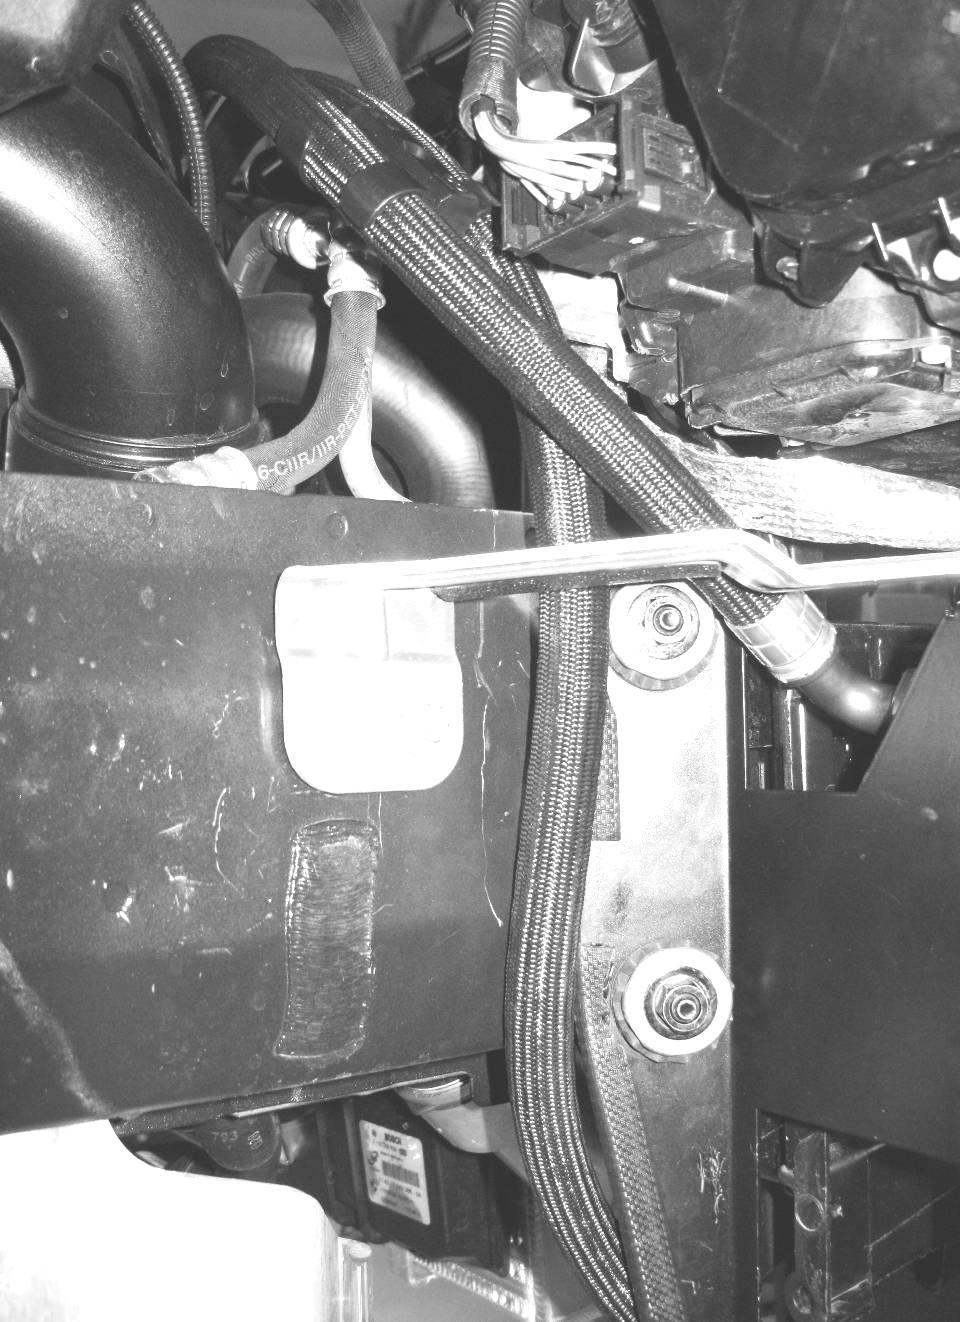 Do not tighten yet. Leave the aluminum Oil Cooler Retaining Strap on the Cooler Assy until after the Oil Lines are fully tightened.